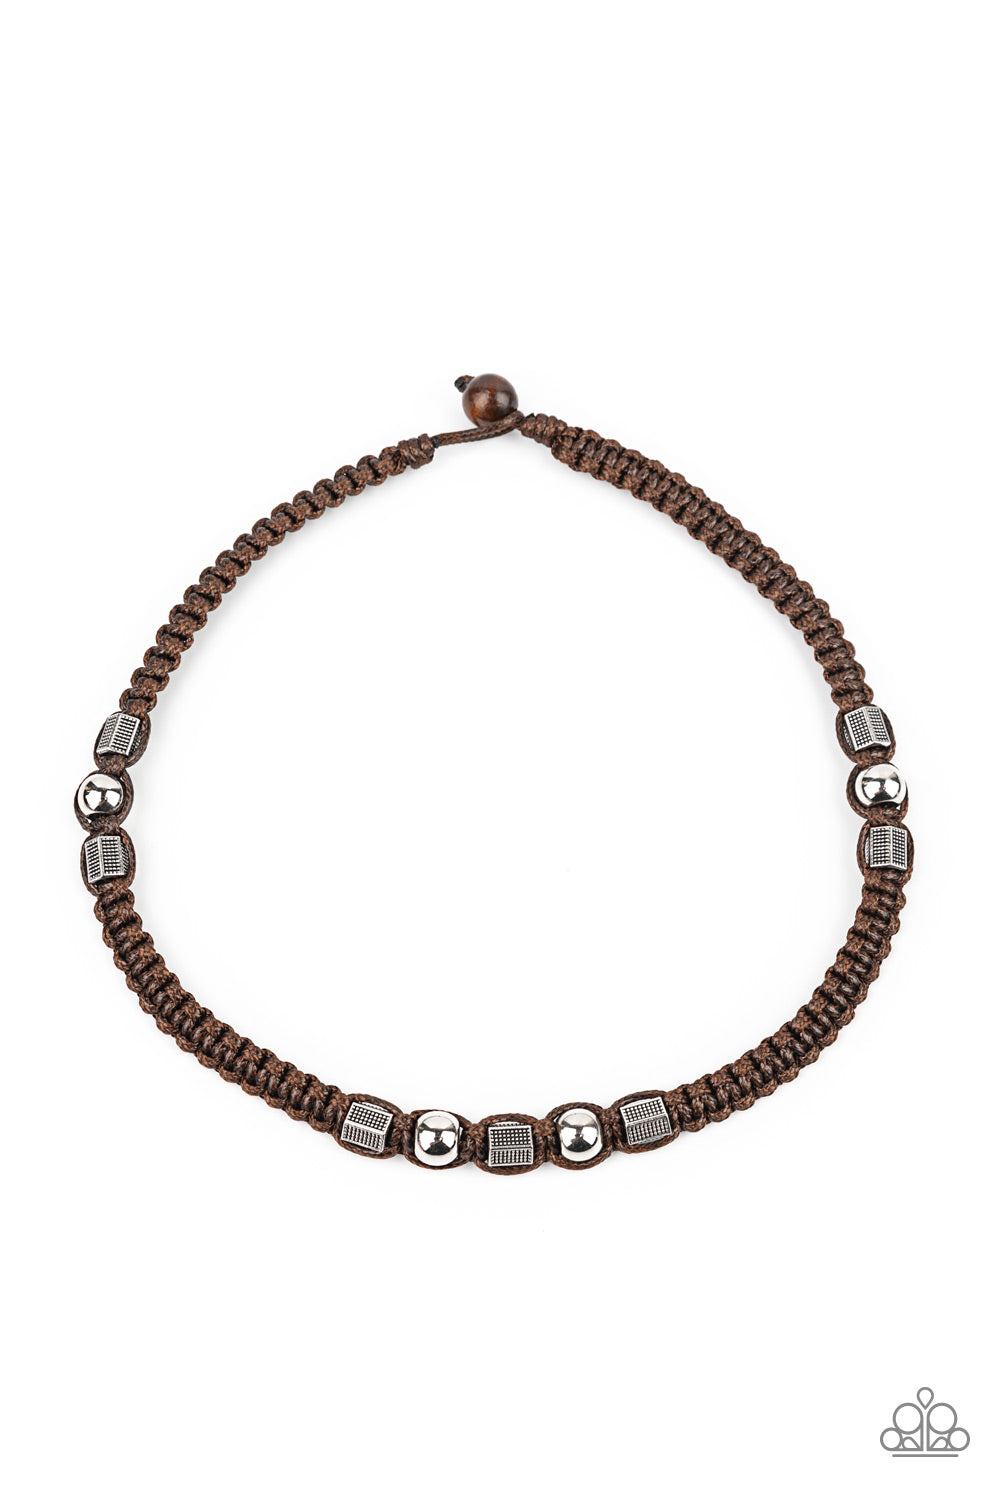 Sections of shiny silver beads and studded hexagonal accents are knotted in place along a brown cord that has been braided around the neck. Features a wooden toggle closure.